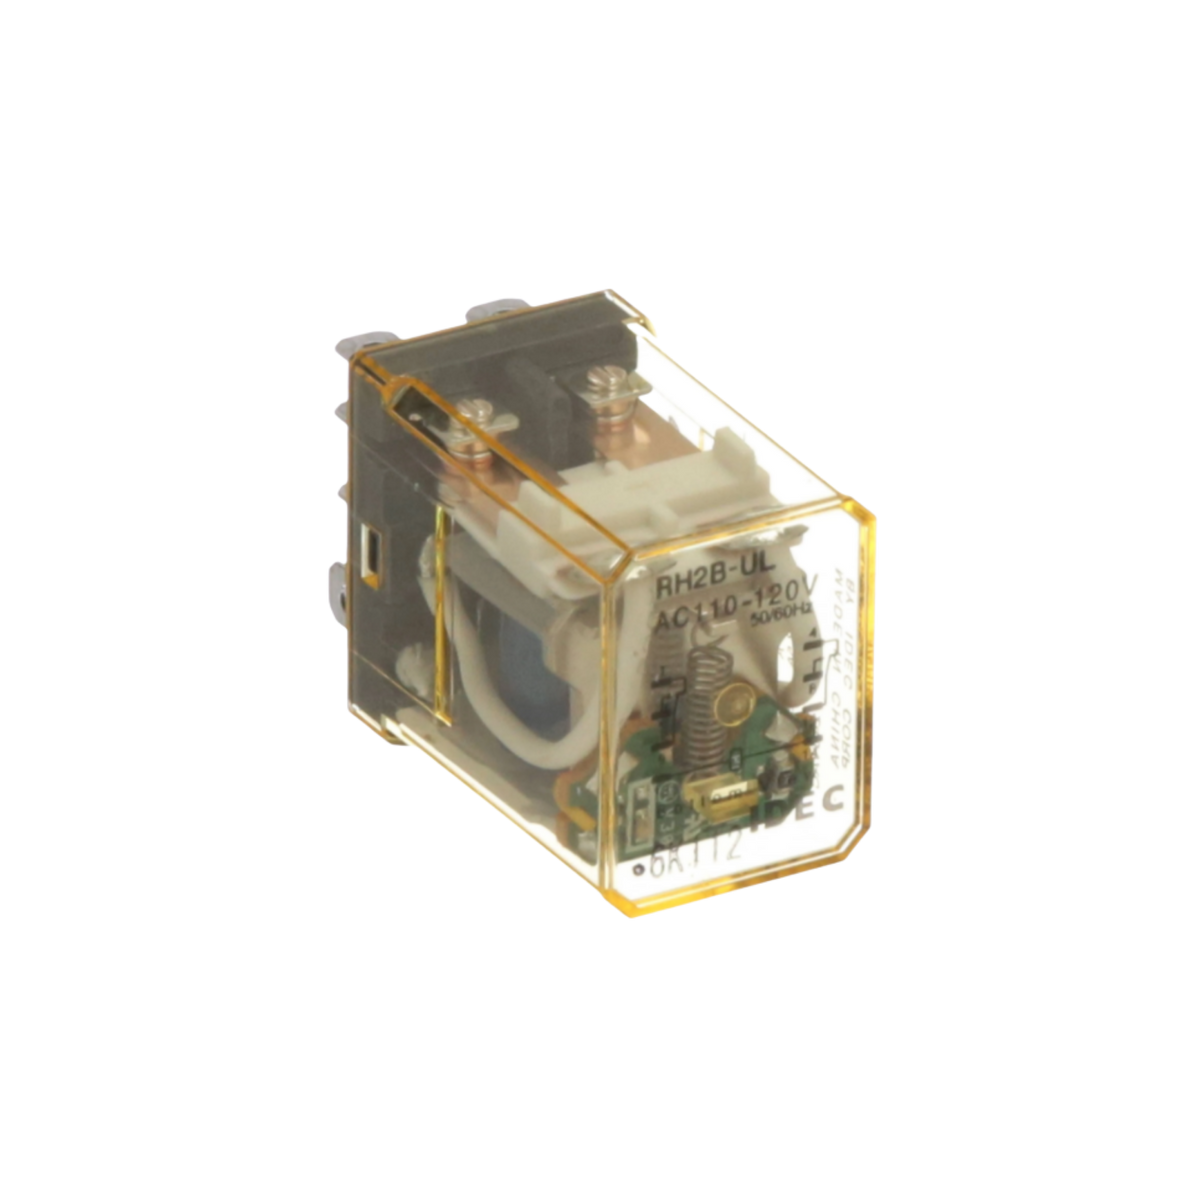 side view of rectangular relay unit with clear yellow housing, wires and contacts inside, and metal tabs at the back